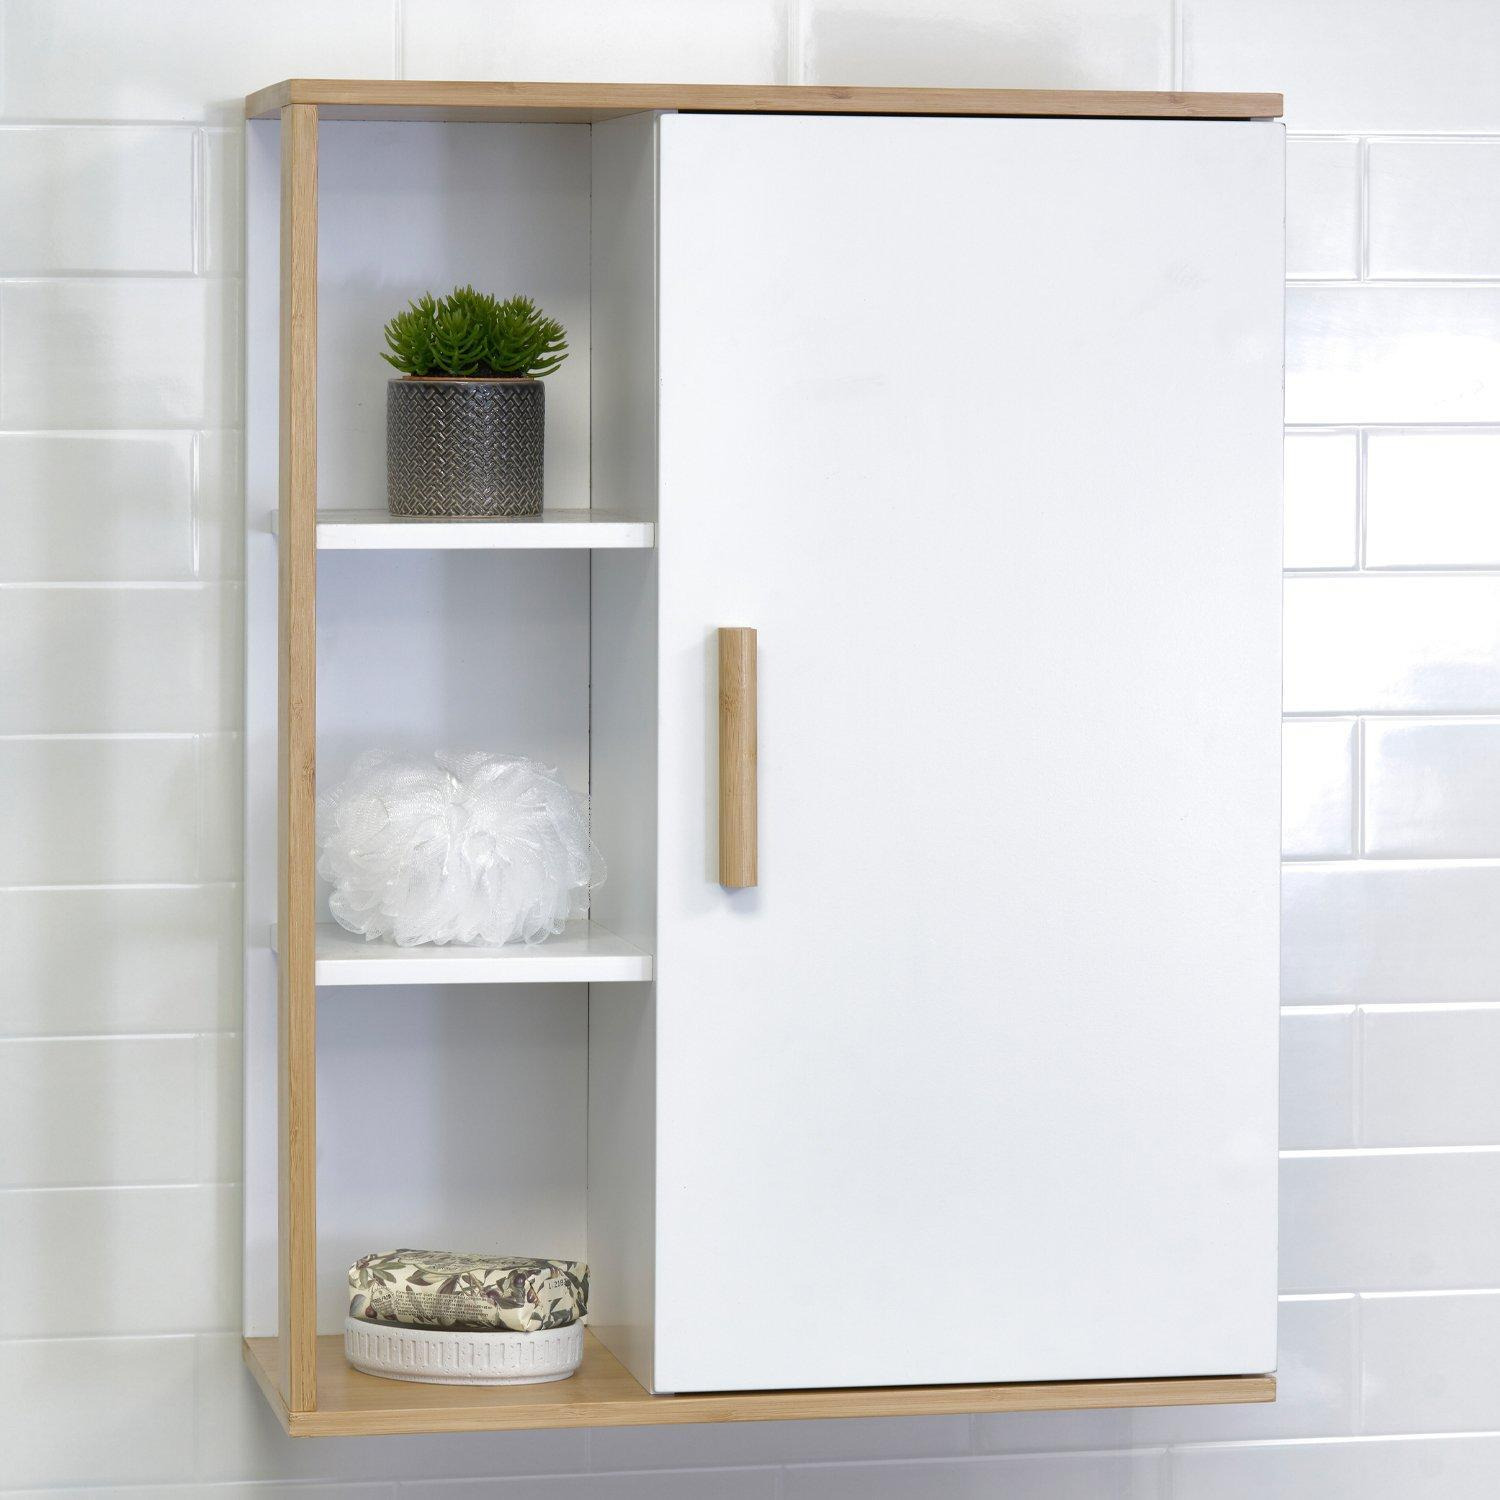 'Cassino' Single Wall Mounted Bathroom Cabinet with Display Shelves - image 1